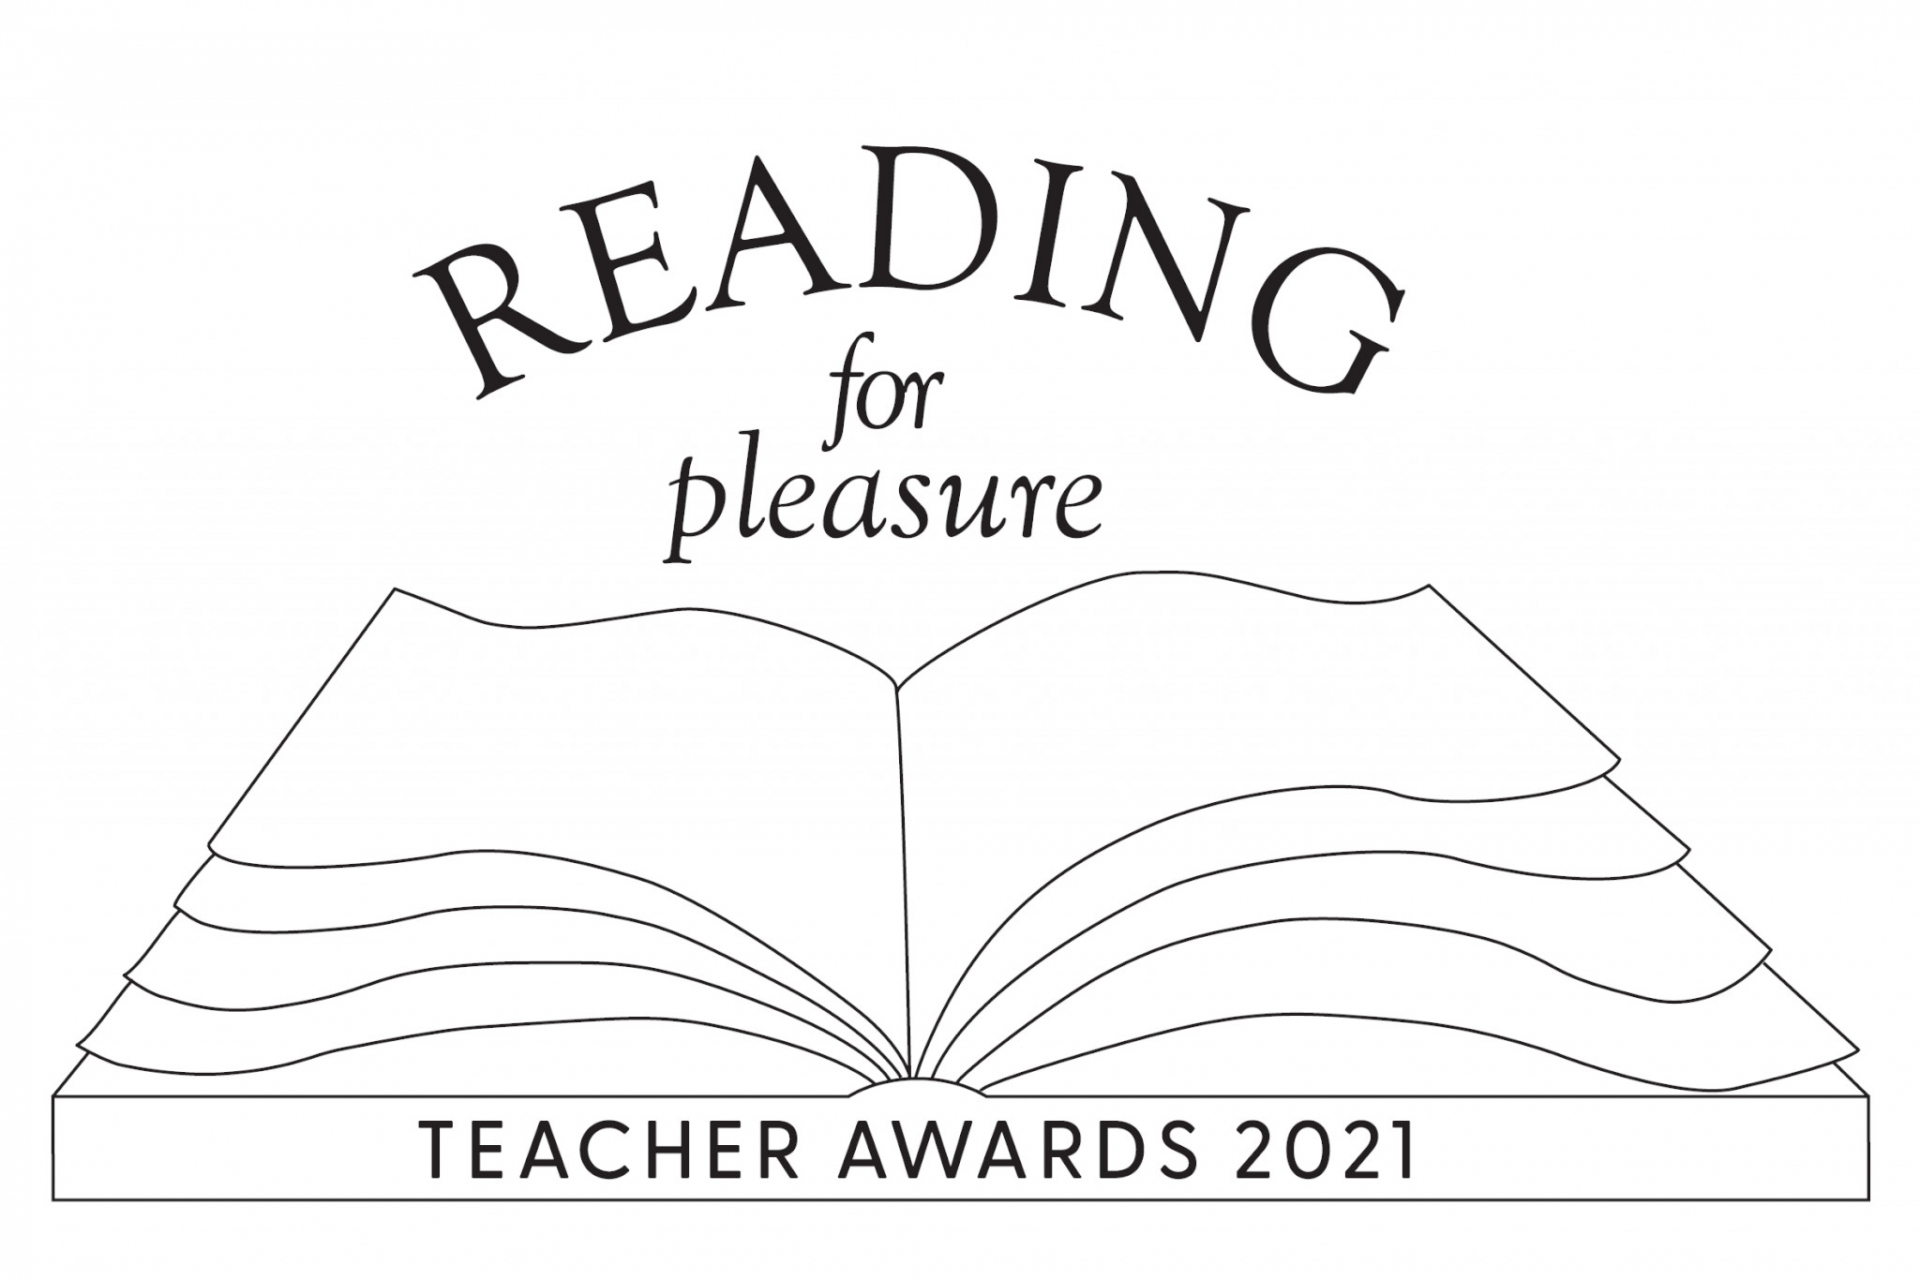 The Farshore Reading for Pleasure Teacher Award 2021 winners are announced, get some ideas for embedding a RfP culture in your school